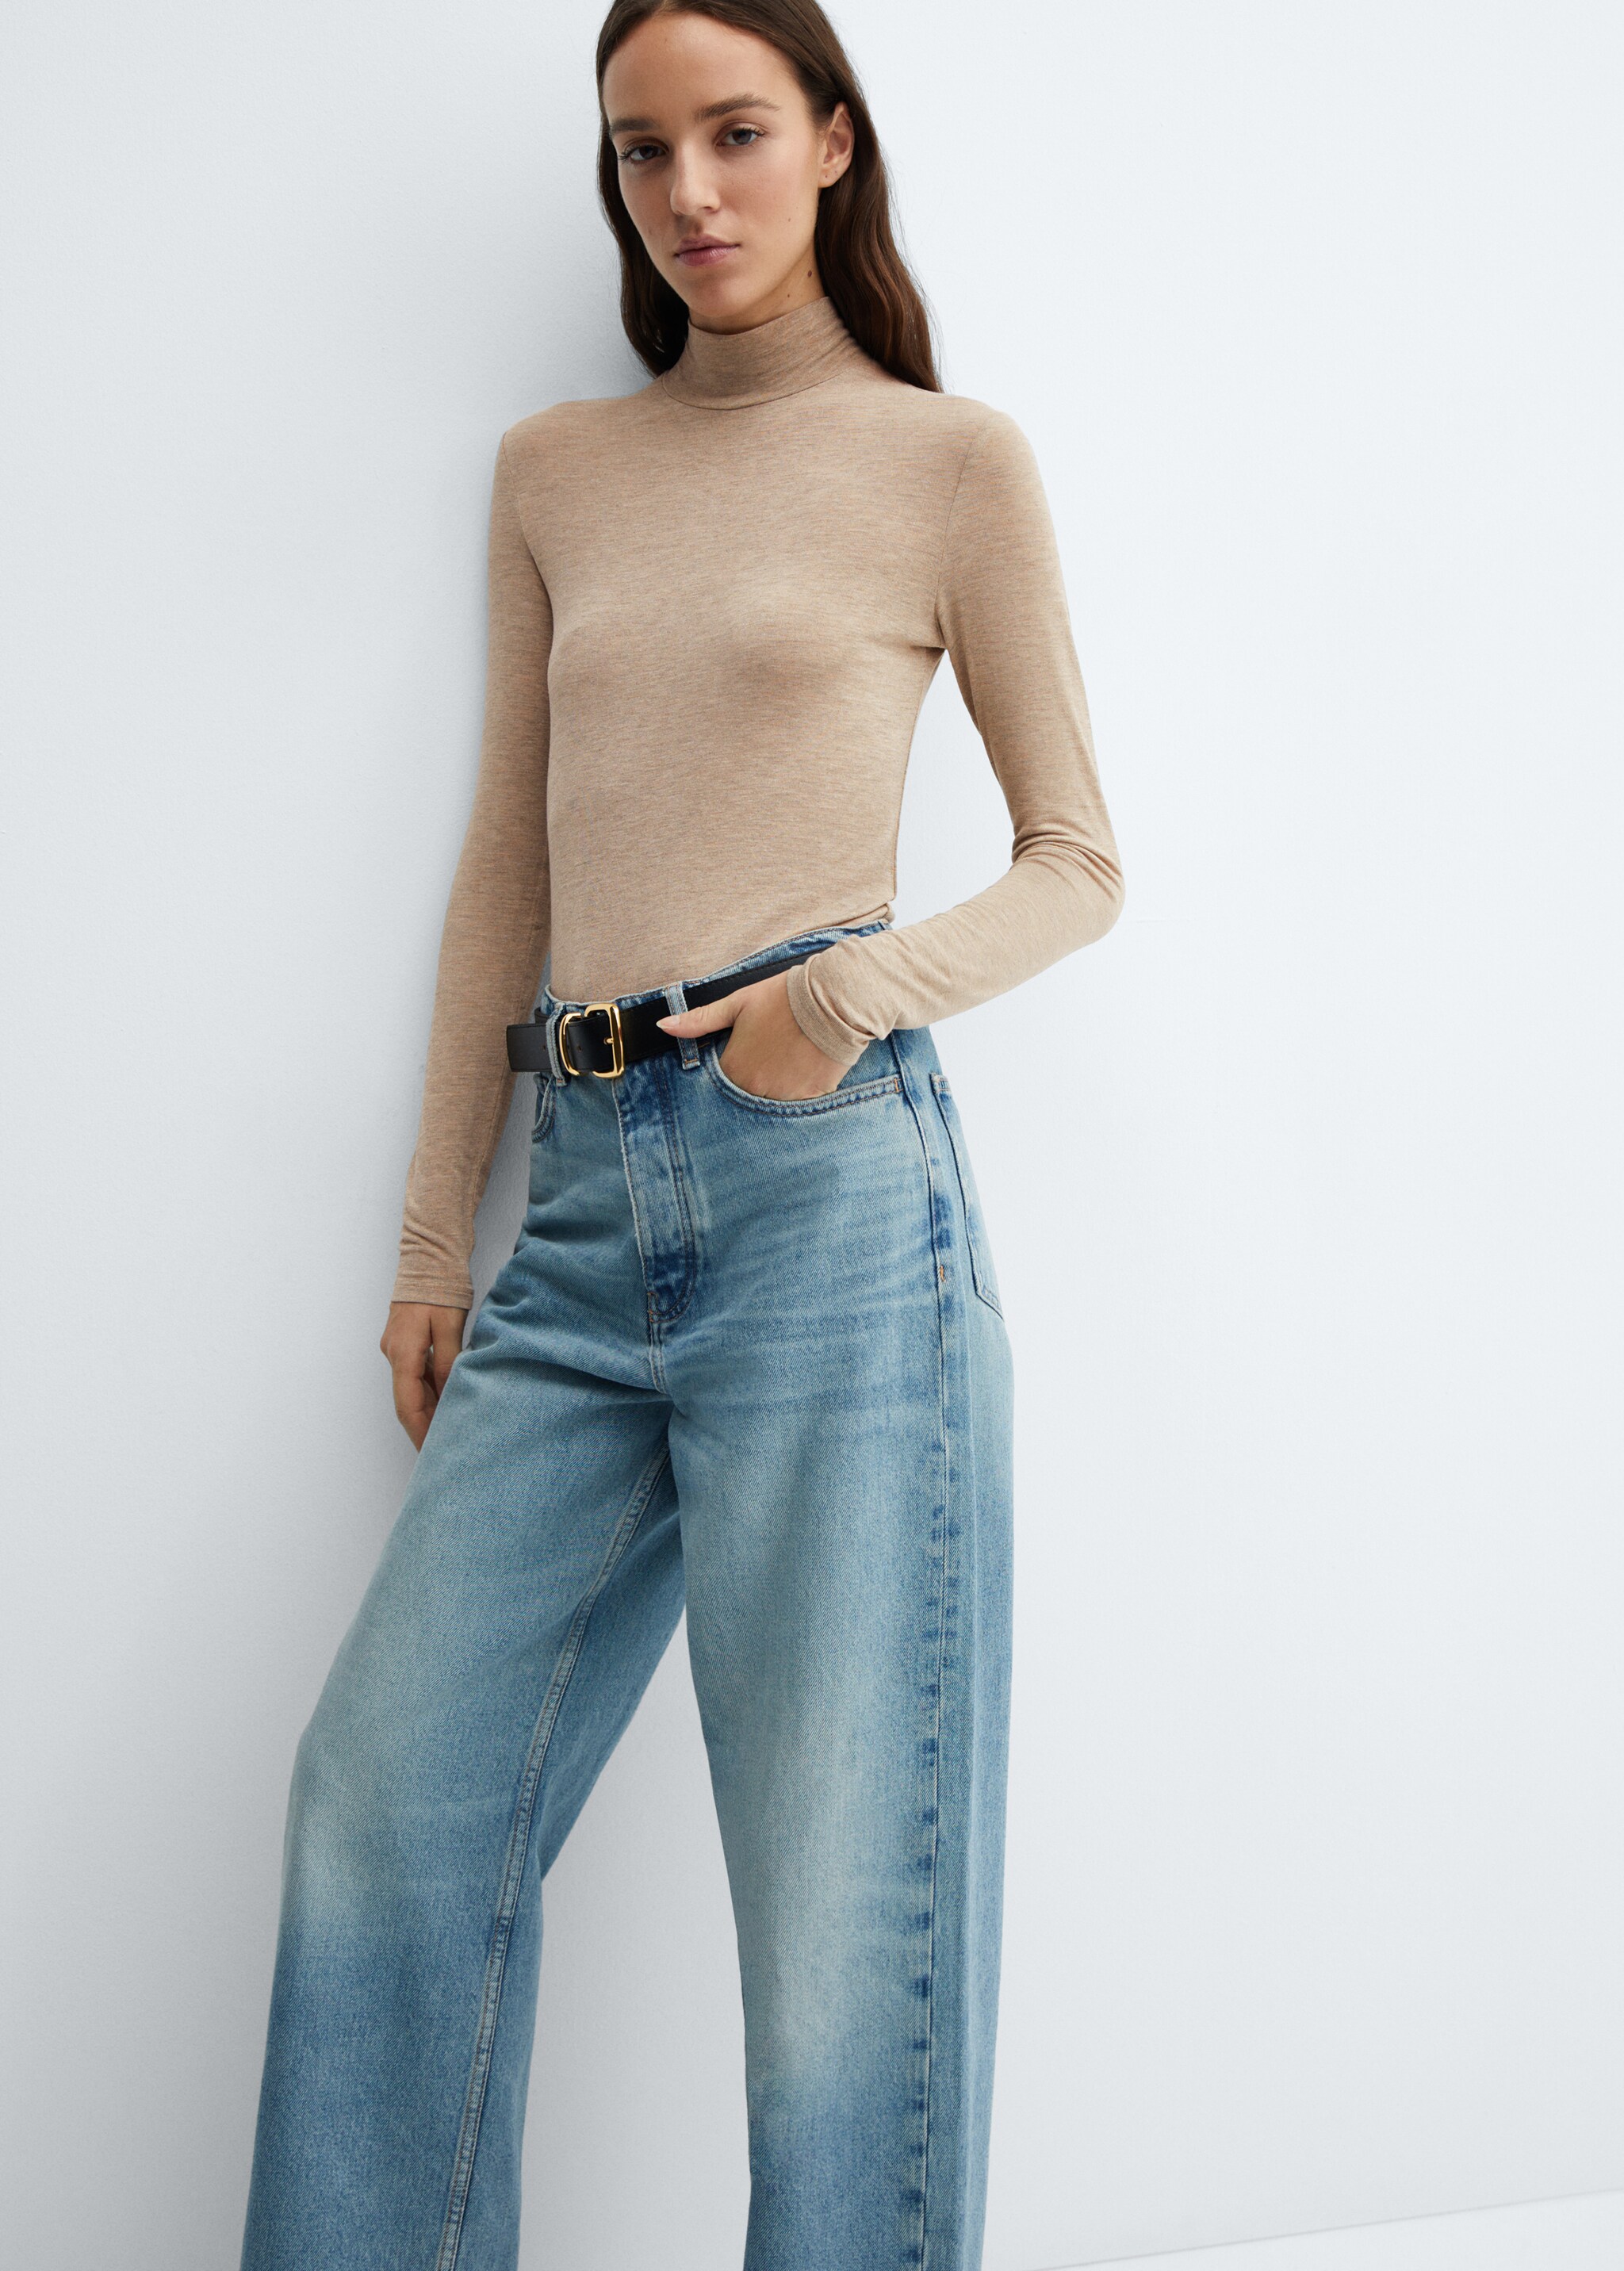 Turtleneck long-sleeved t-shirt - Details of the article 6